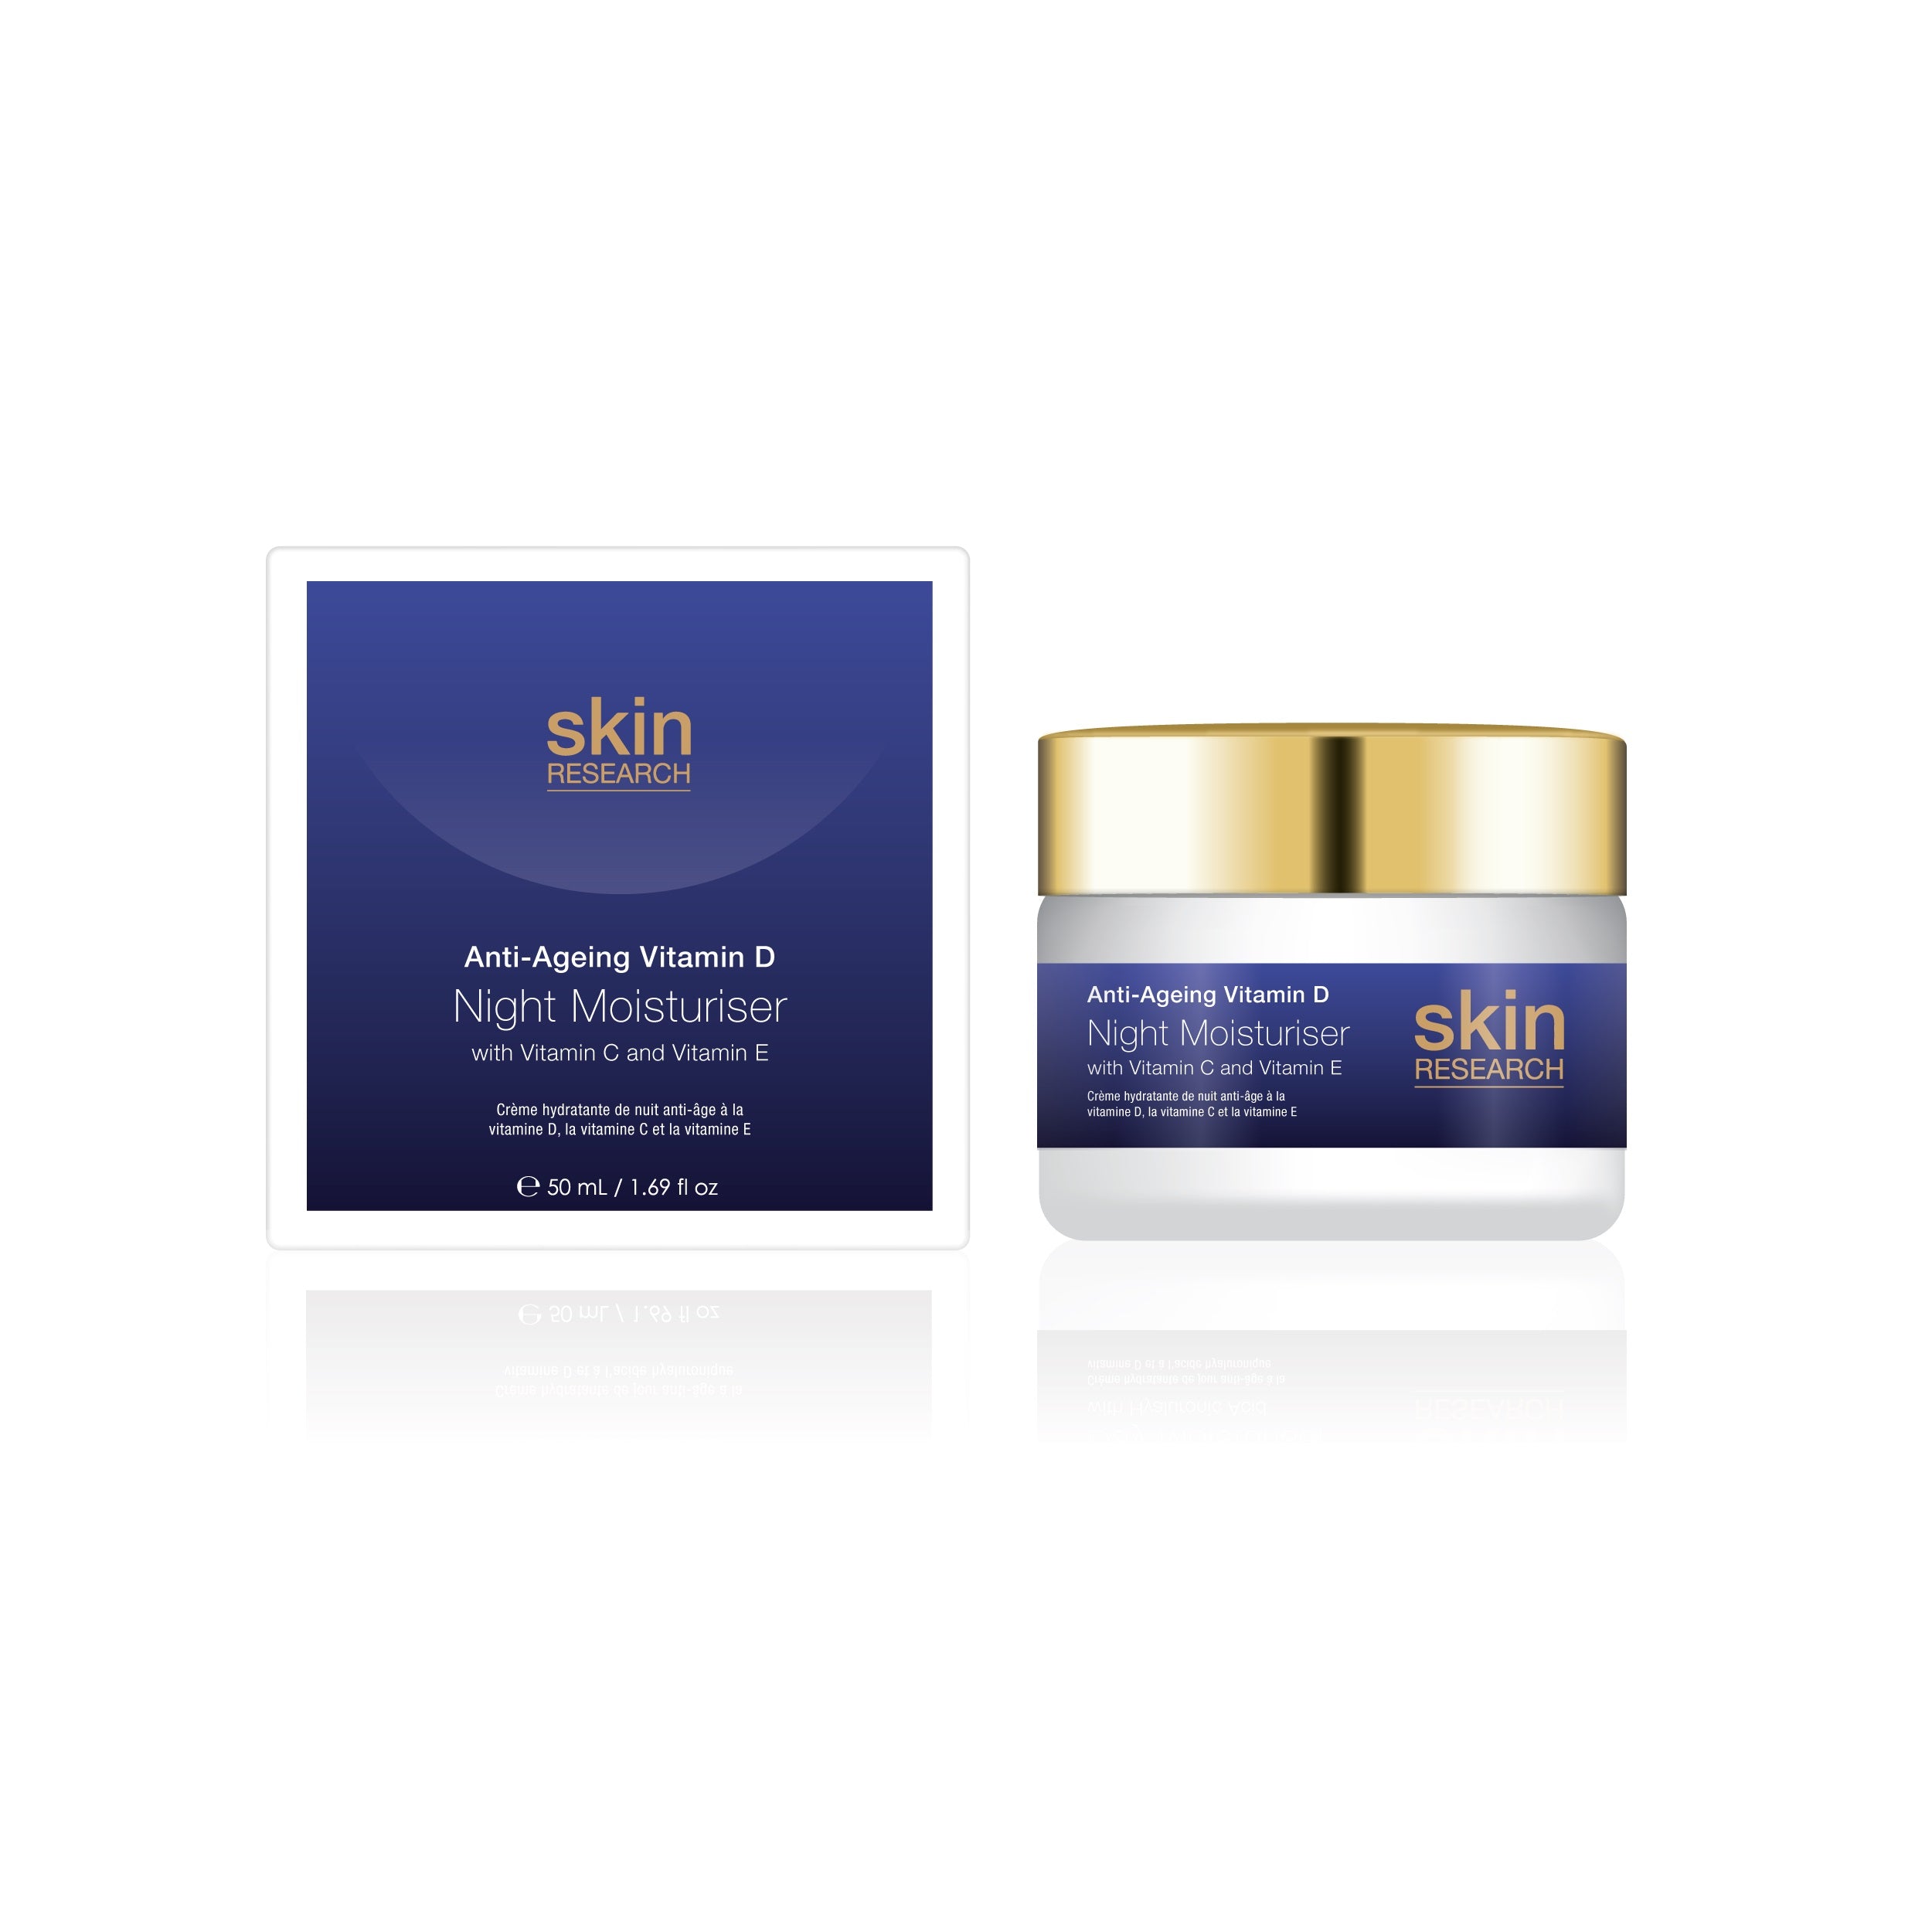 K3 Skin Research Anti-Ageing Vitamin D Day Moisturiser with Hyaluronic Acid +.